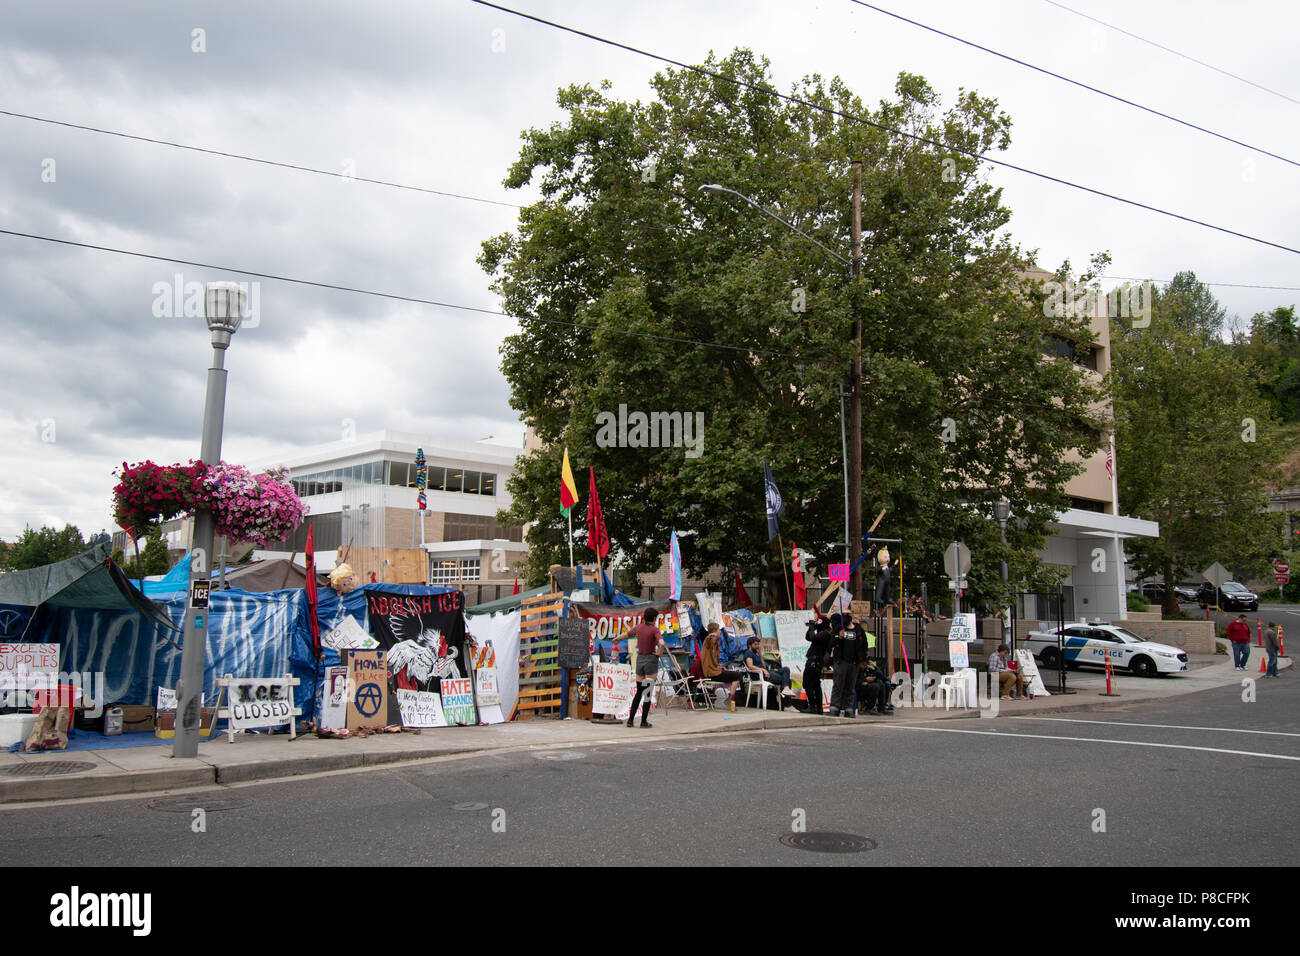 Portland, USA. 10th July, 2018. Protesters in front of their camp next to the Portland ICE (U.S. Immigration and Customs Enforcement) building Credit: David Krug/Alamy Live News Stock Photo